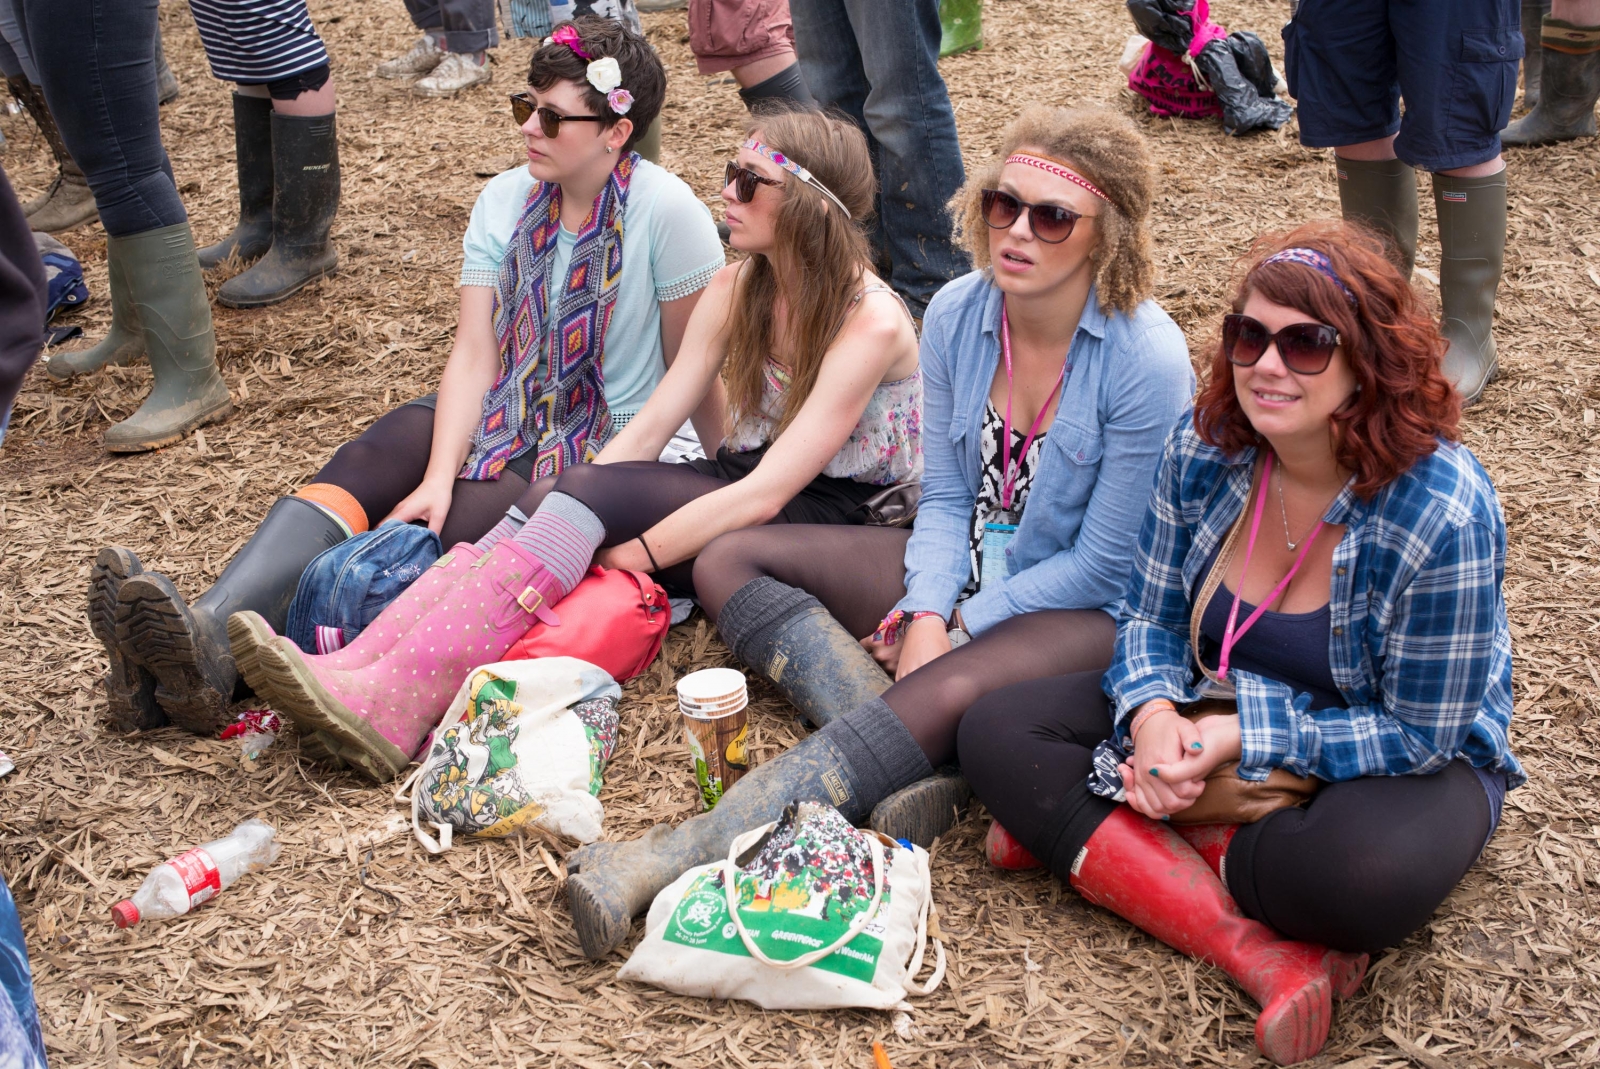 Glastonbury 2016 Announces First Ever Women Only Zone